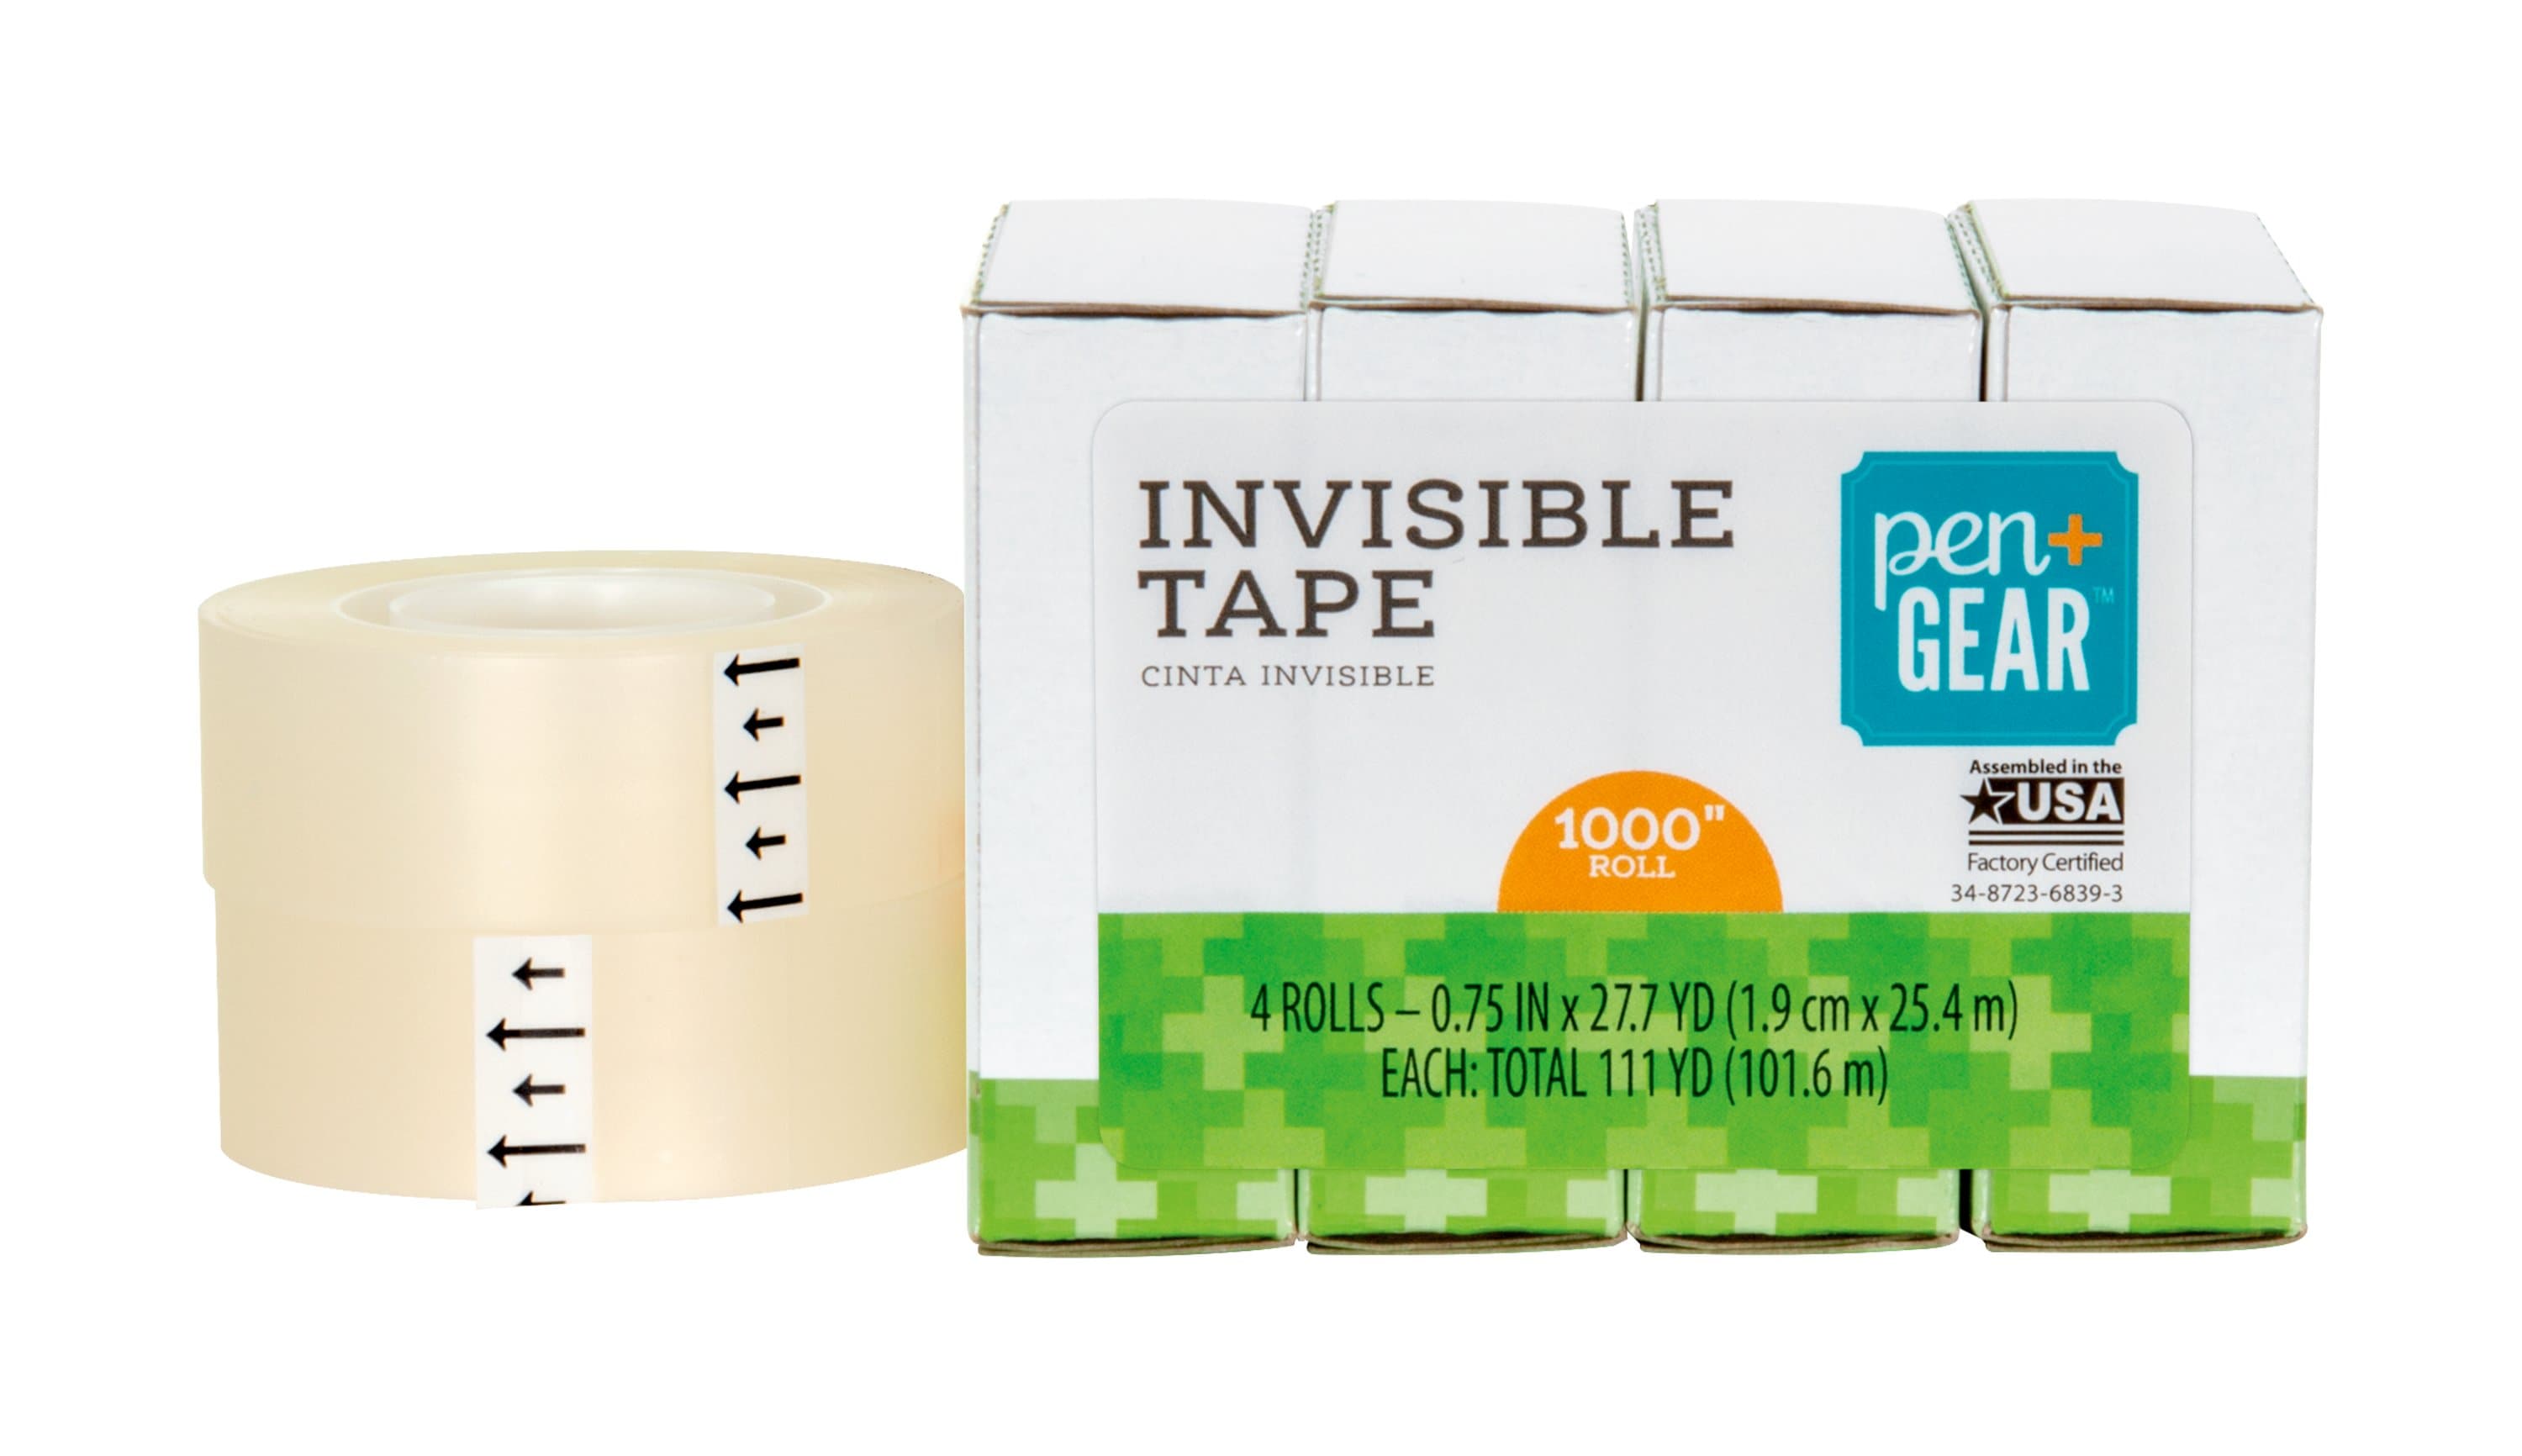 Pen + Gear Invisible Tape, Clear, 3/4 inch x 1000 inch, 4 Rolls